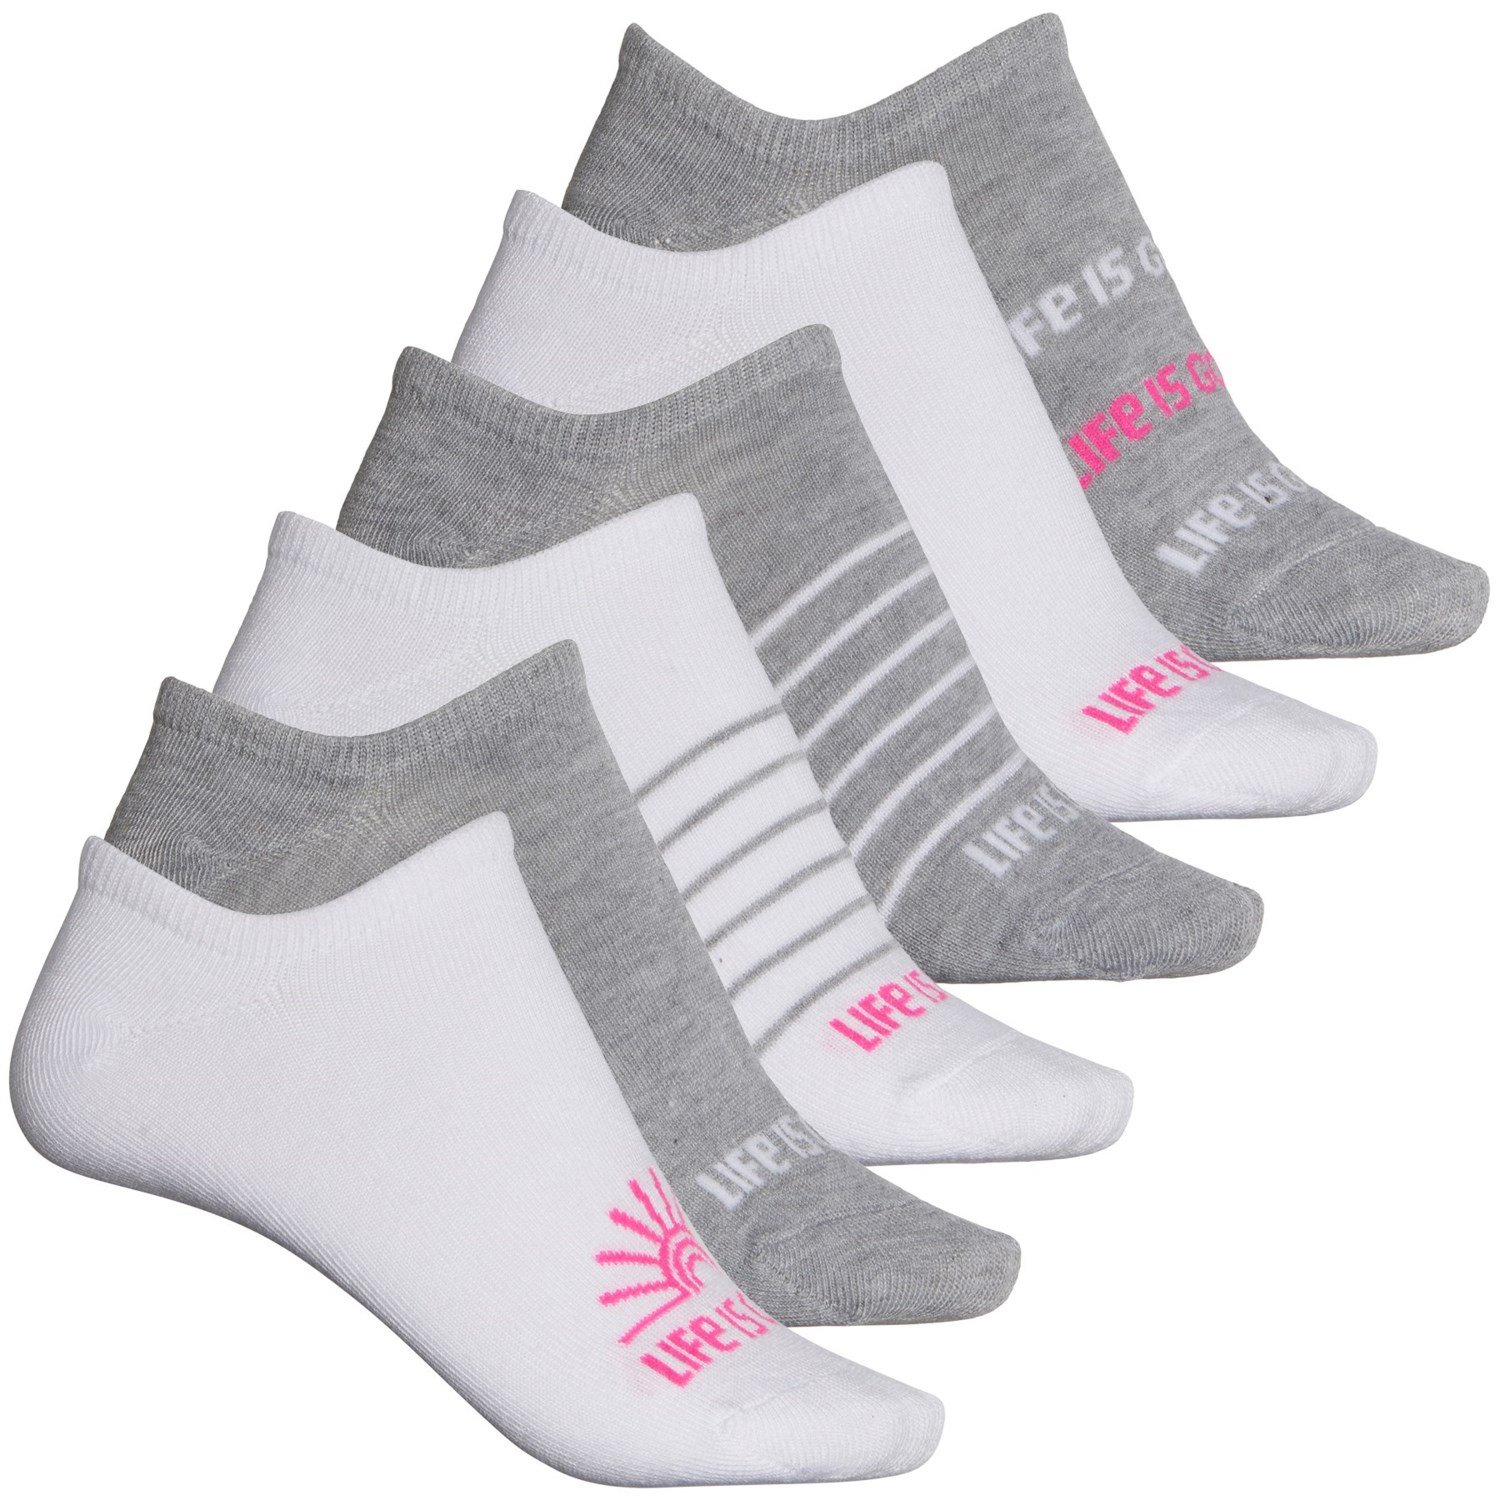 Life is good® Comfort Cuff Liner Socks (For Women) - Save 46%